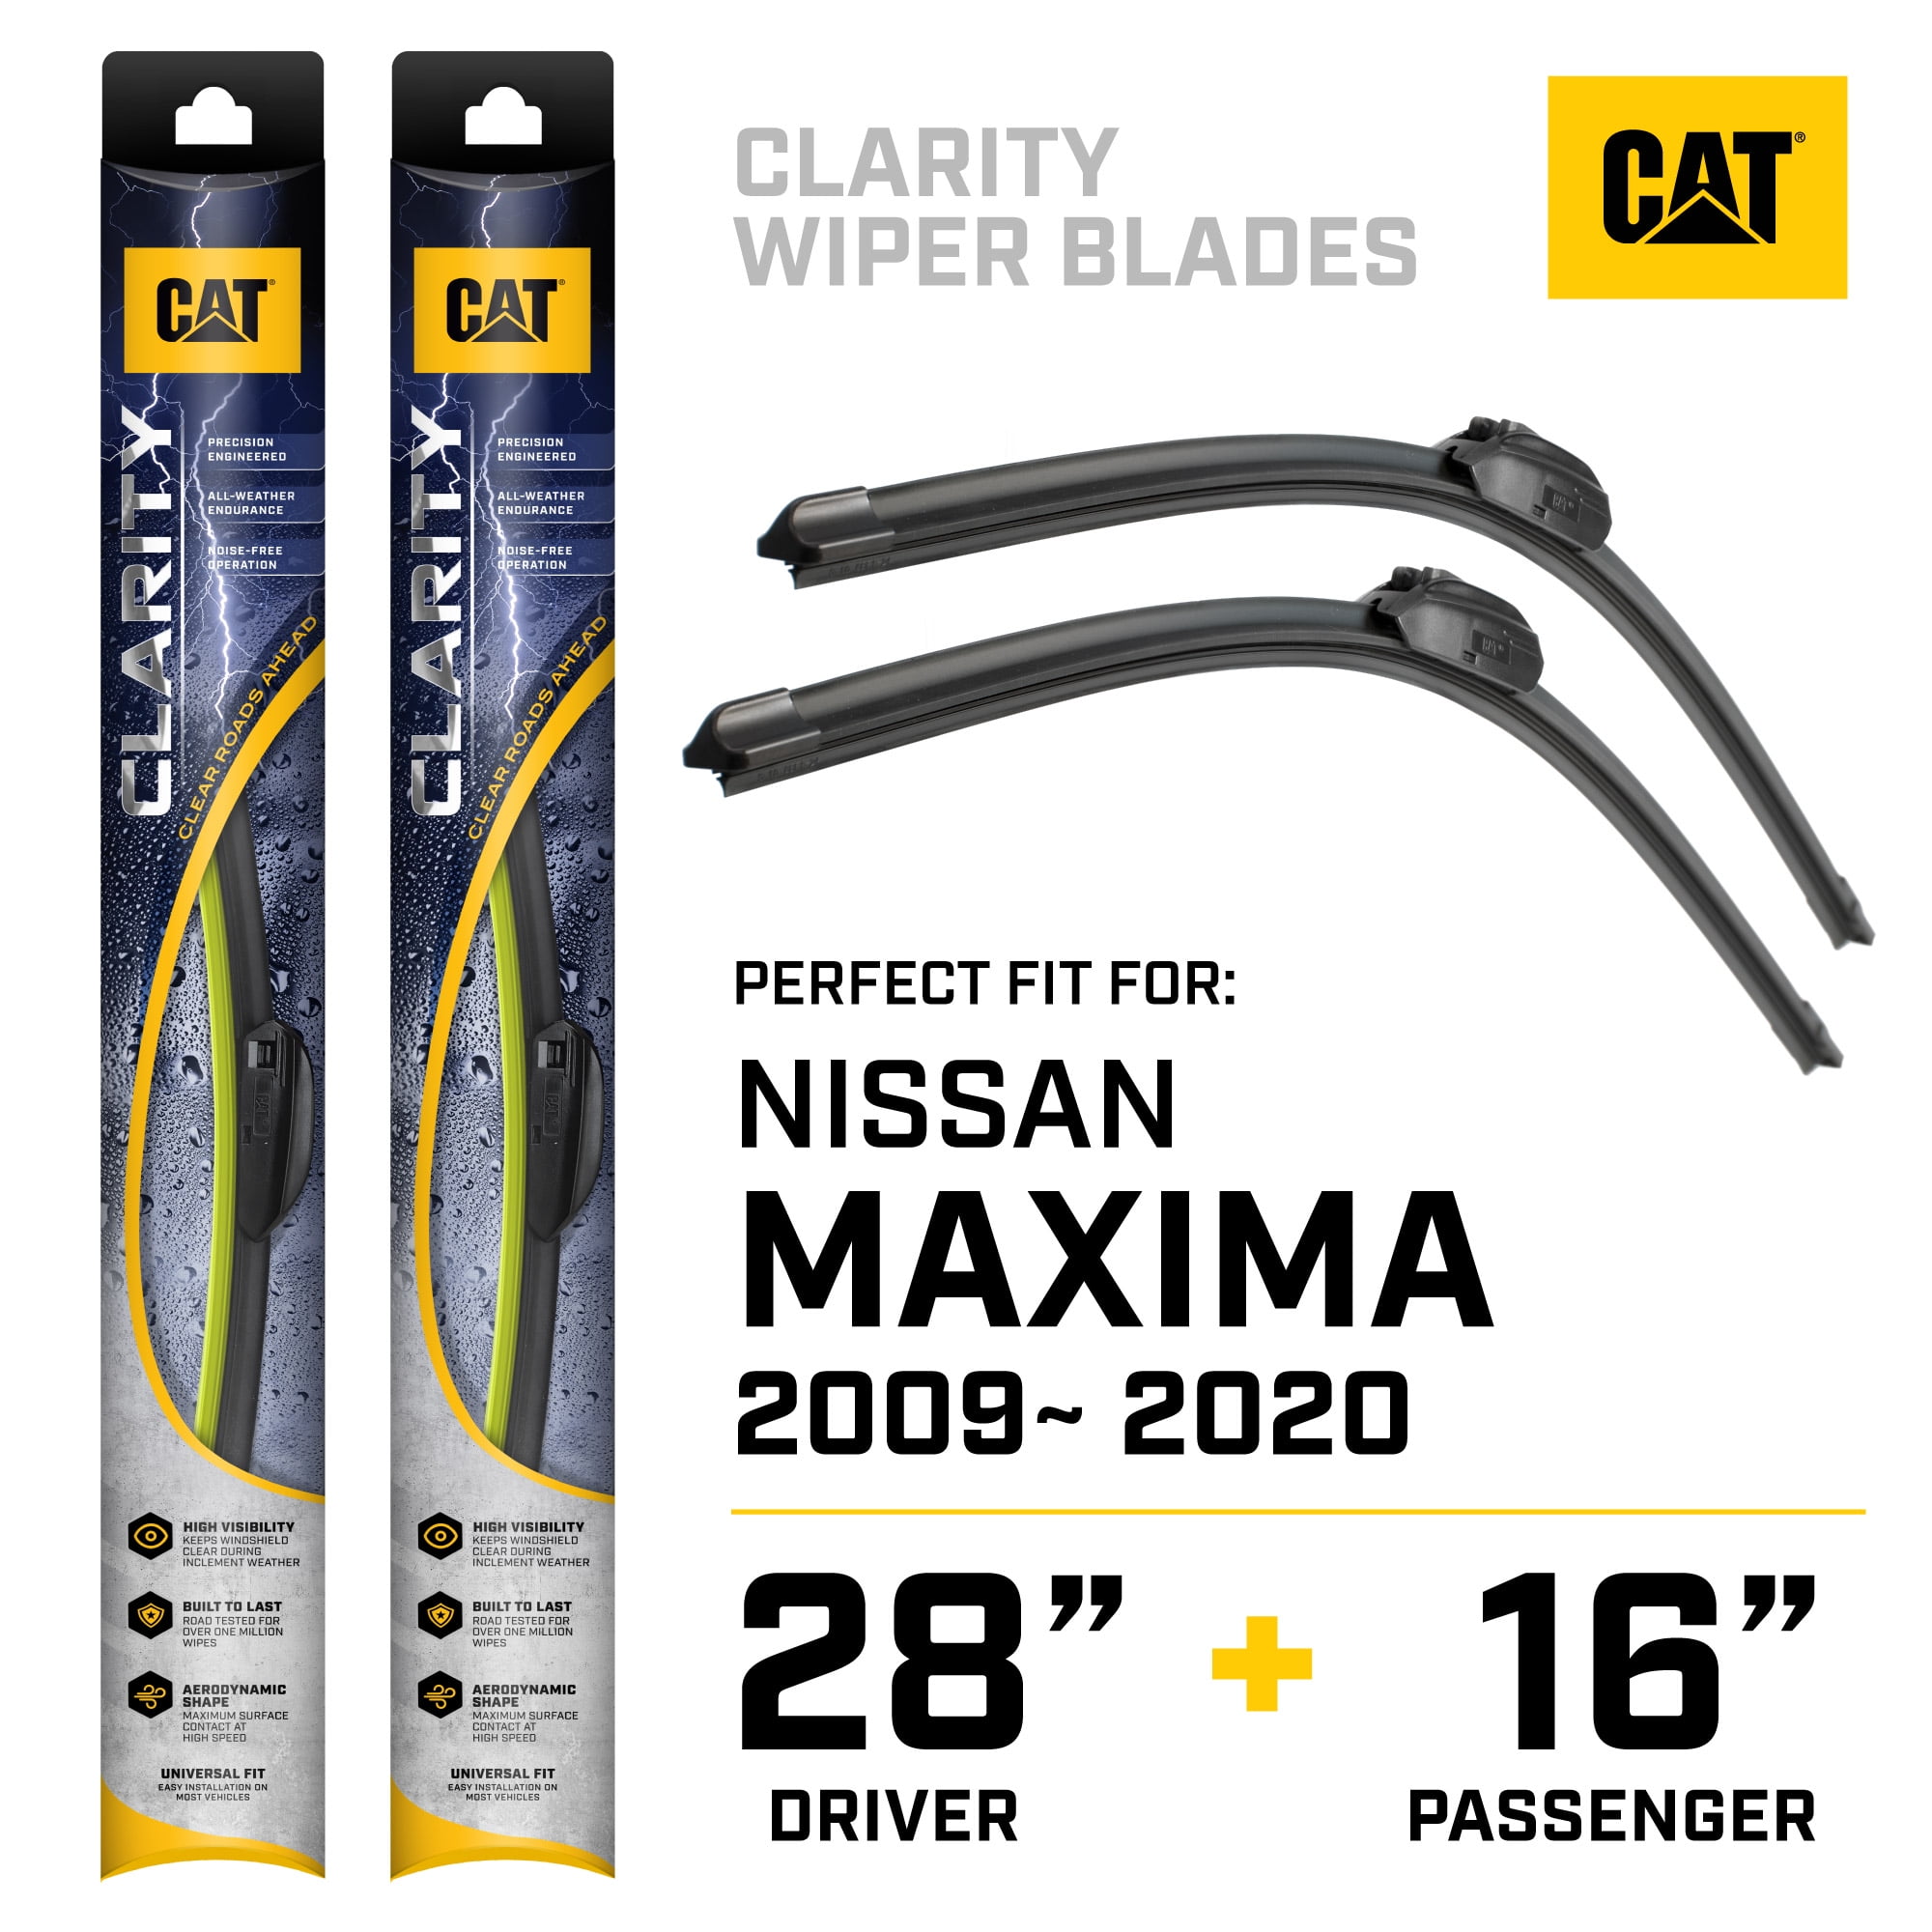 20 + 20 Inch Pair for Front Windshield Caterpillar Clarity Premium Performance All Season Replacement Windshield Wiper Blades for Car Truck Van SUV Black